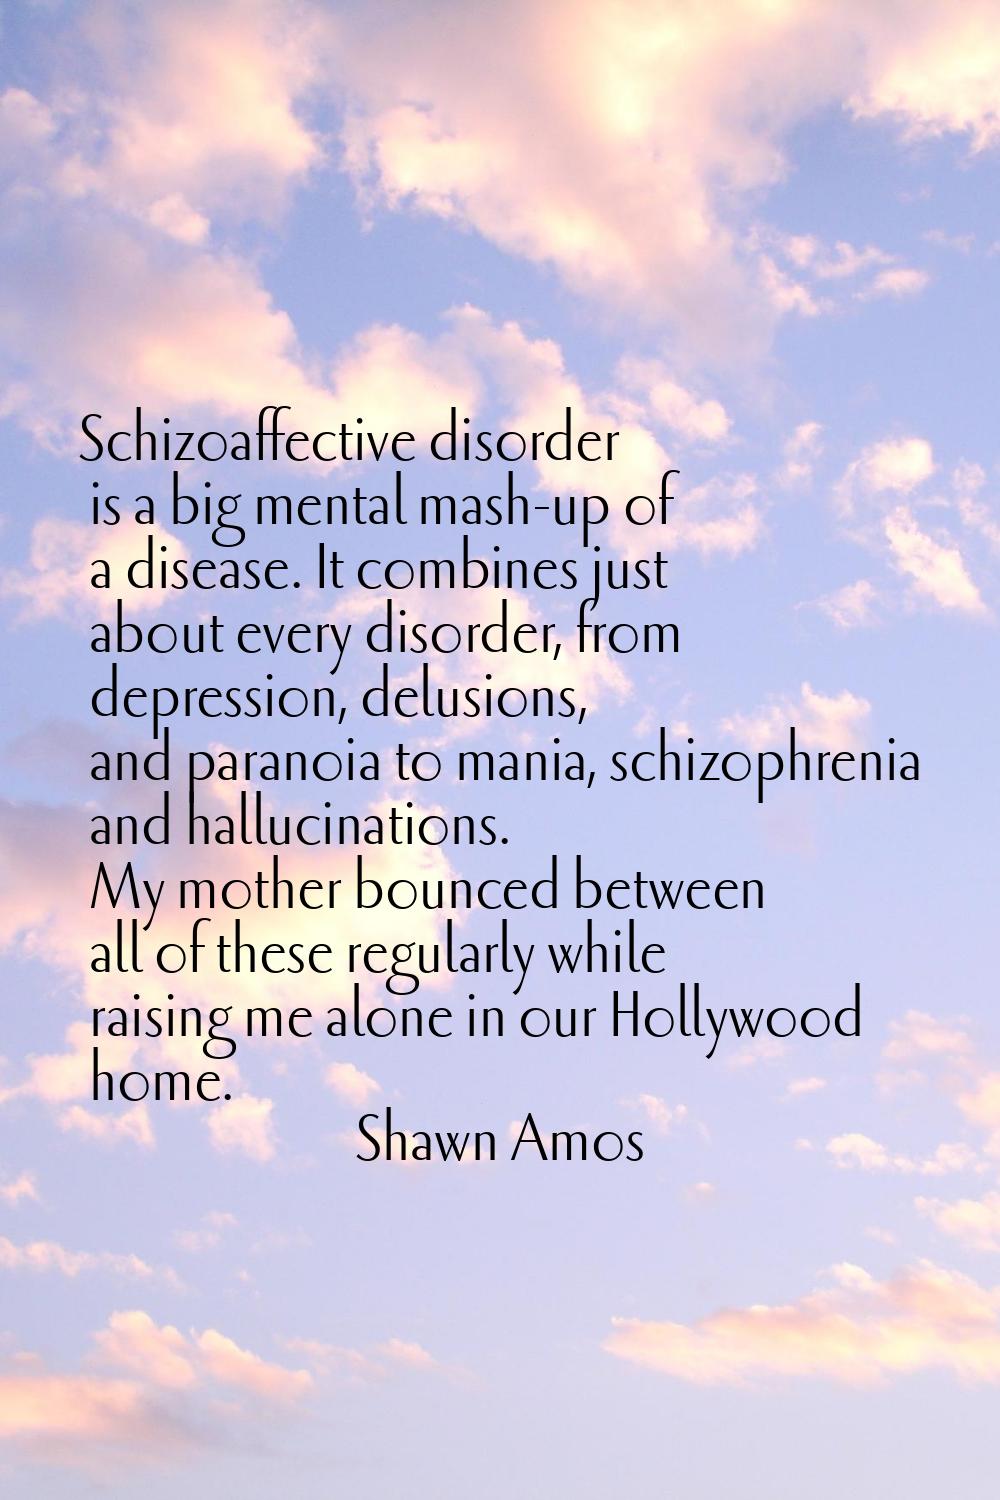 Schizoaffective disorder is a big mental mash-up of a disease. It combines just about every disorde